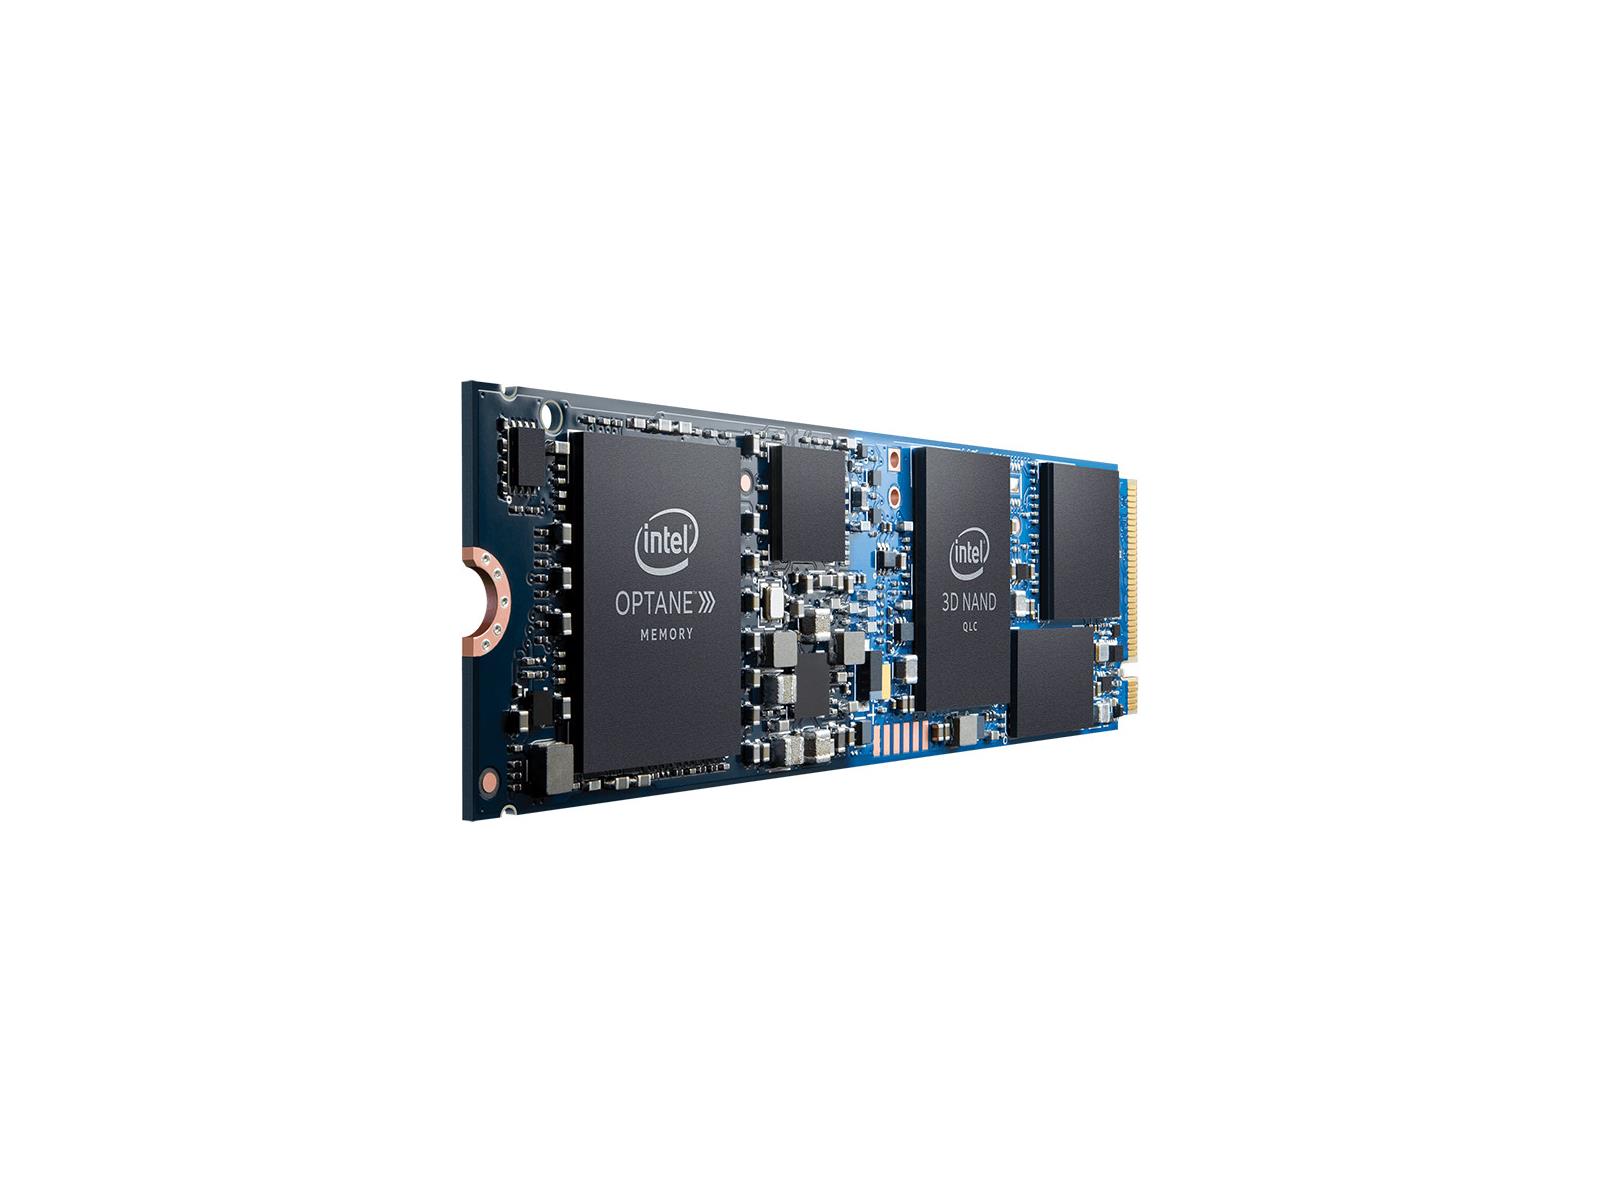 Planned Dew handy Intel Optane Memory H10 Review: Hybrid SSD Storage Acceleration - Page 2 |  HotHardware